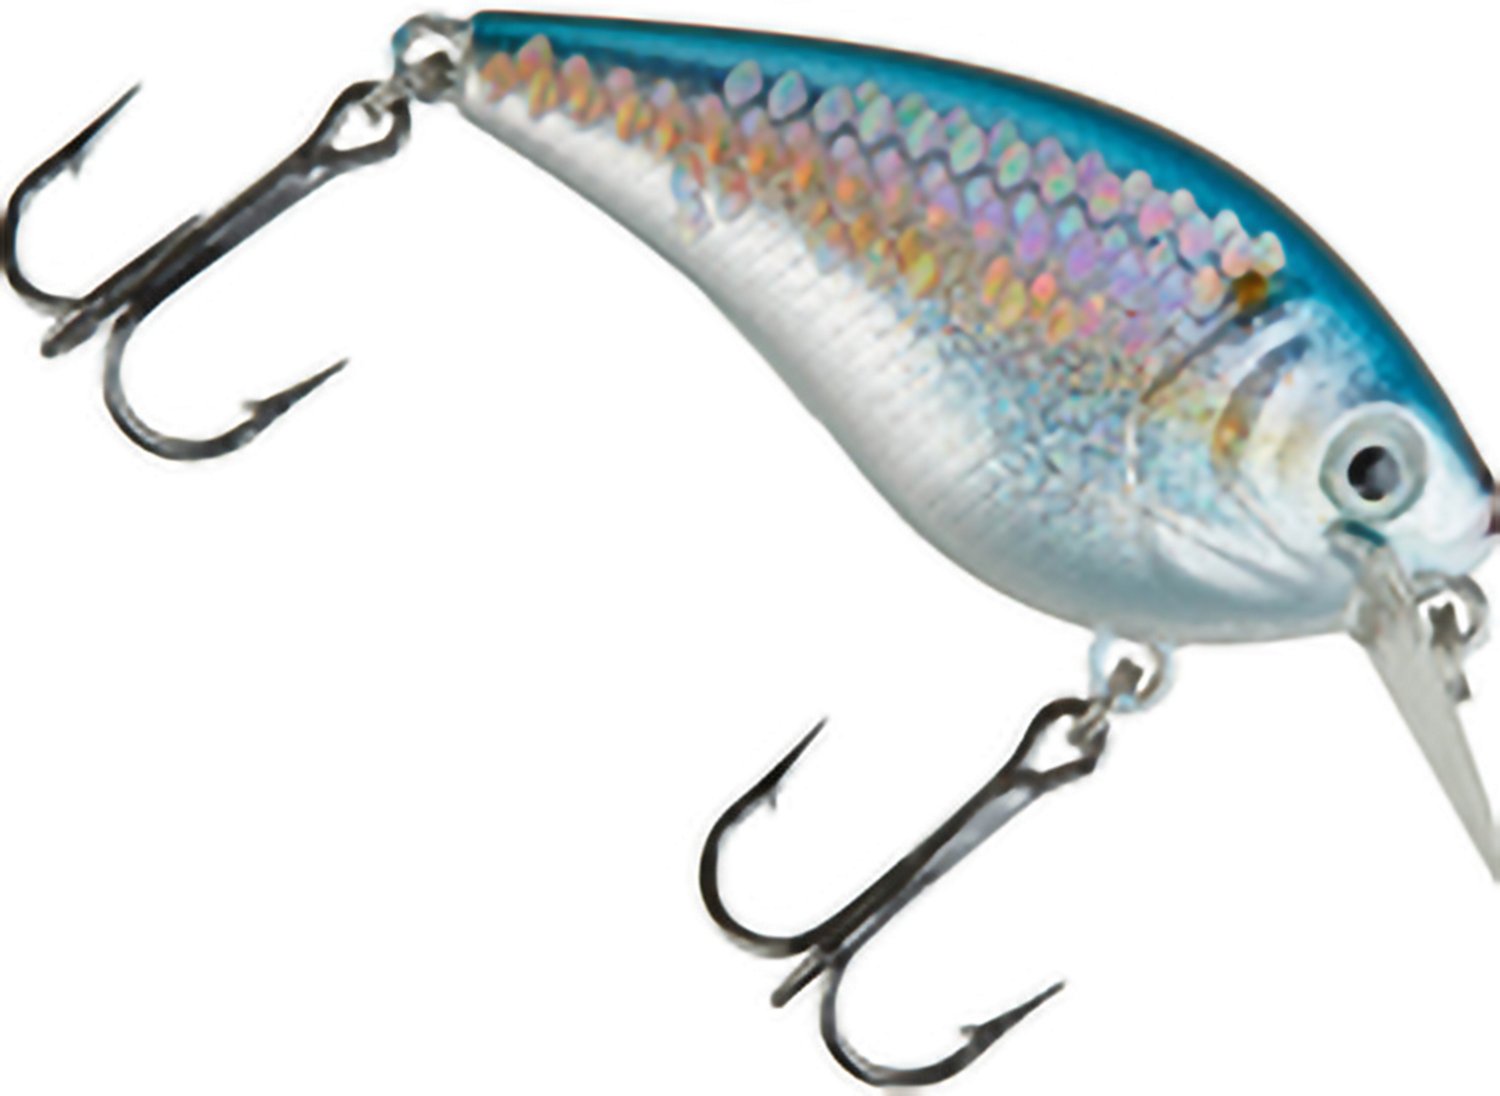 New H20 Xpress Jerkbaits From Academy - Fishing Tackle - Bass Fishing Forums